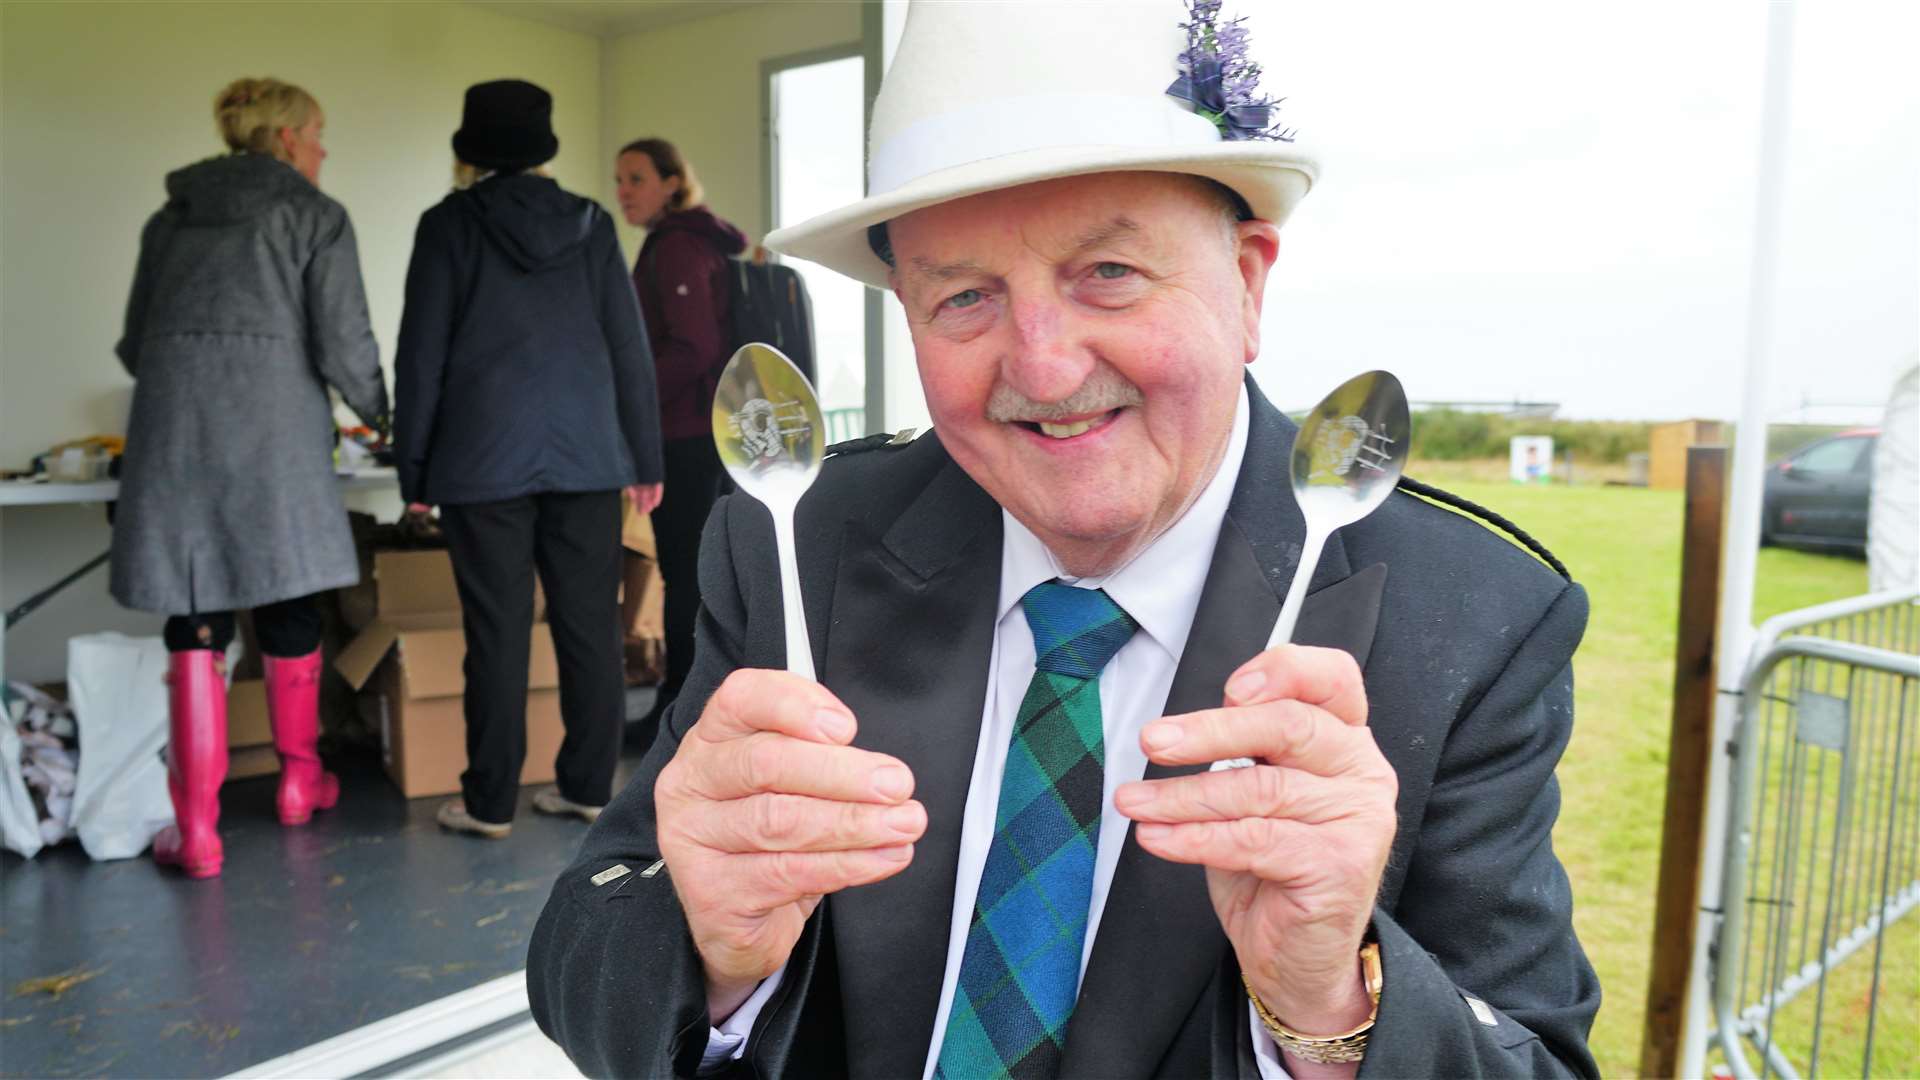 Compere at the event Willie Mackay was delighted to receive an engraved set of silver spoons. Willie is well known for his spoon playing skills and played a tune minutes after receiving his gift. Picture: DGS